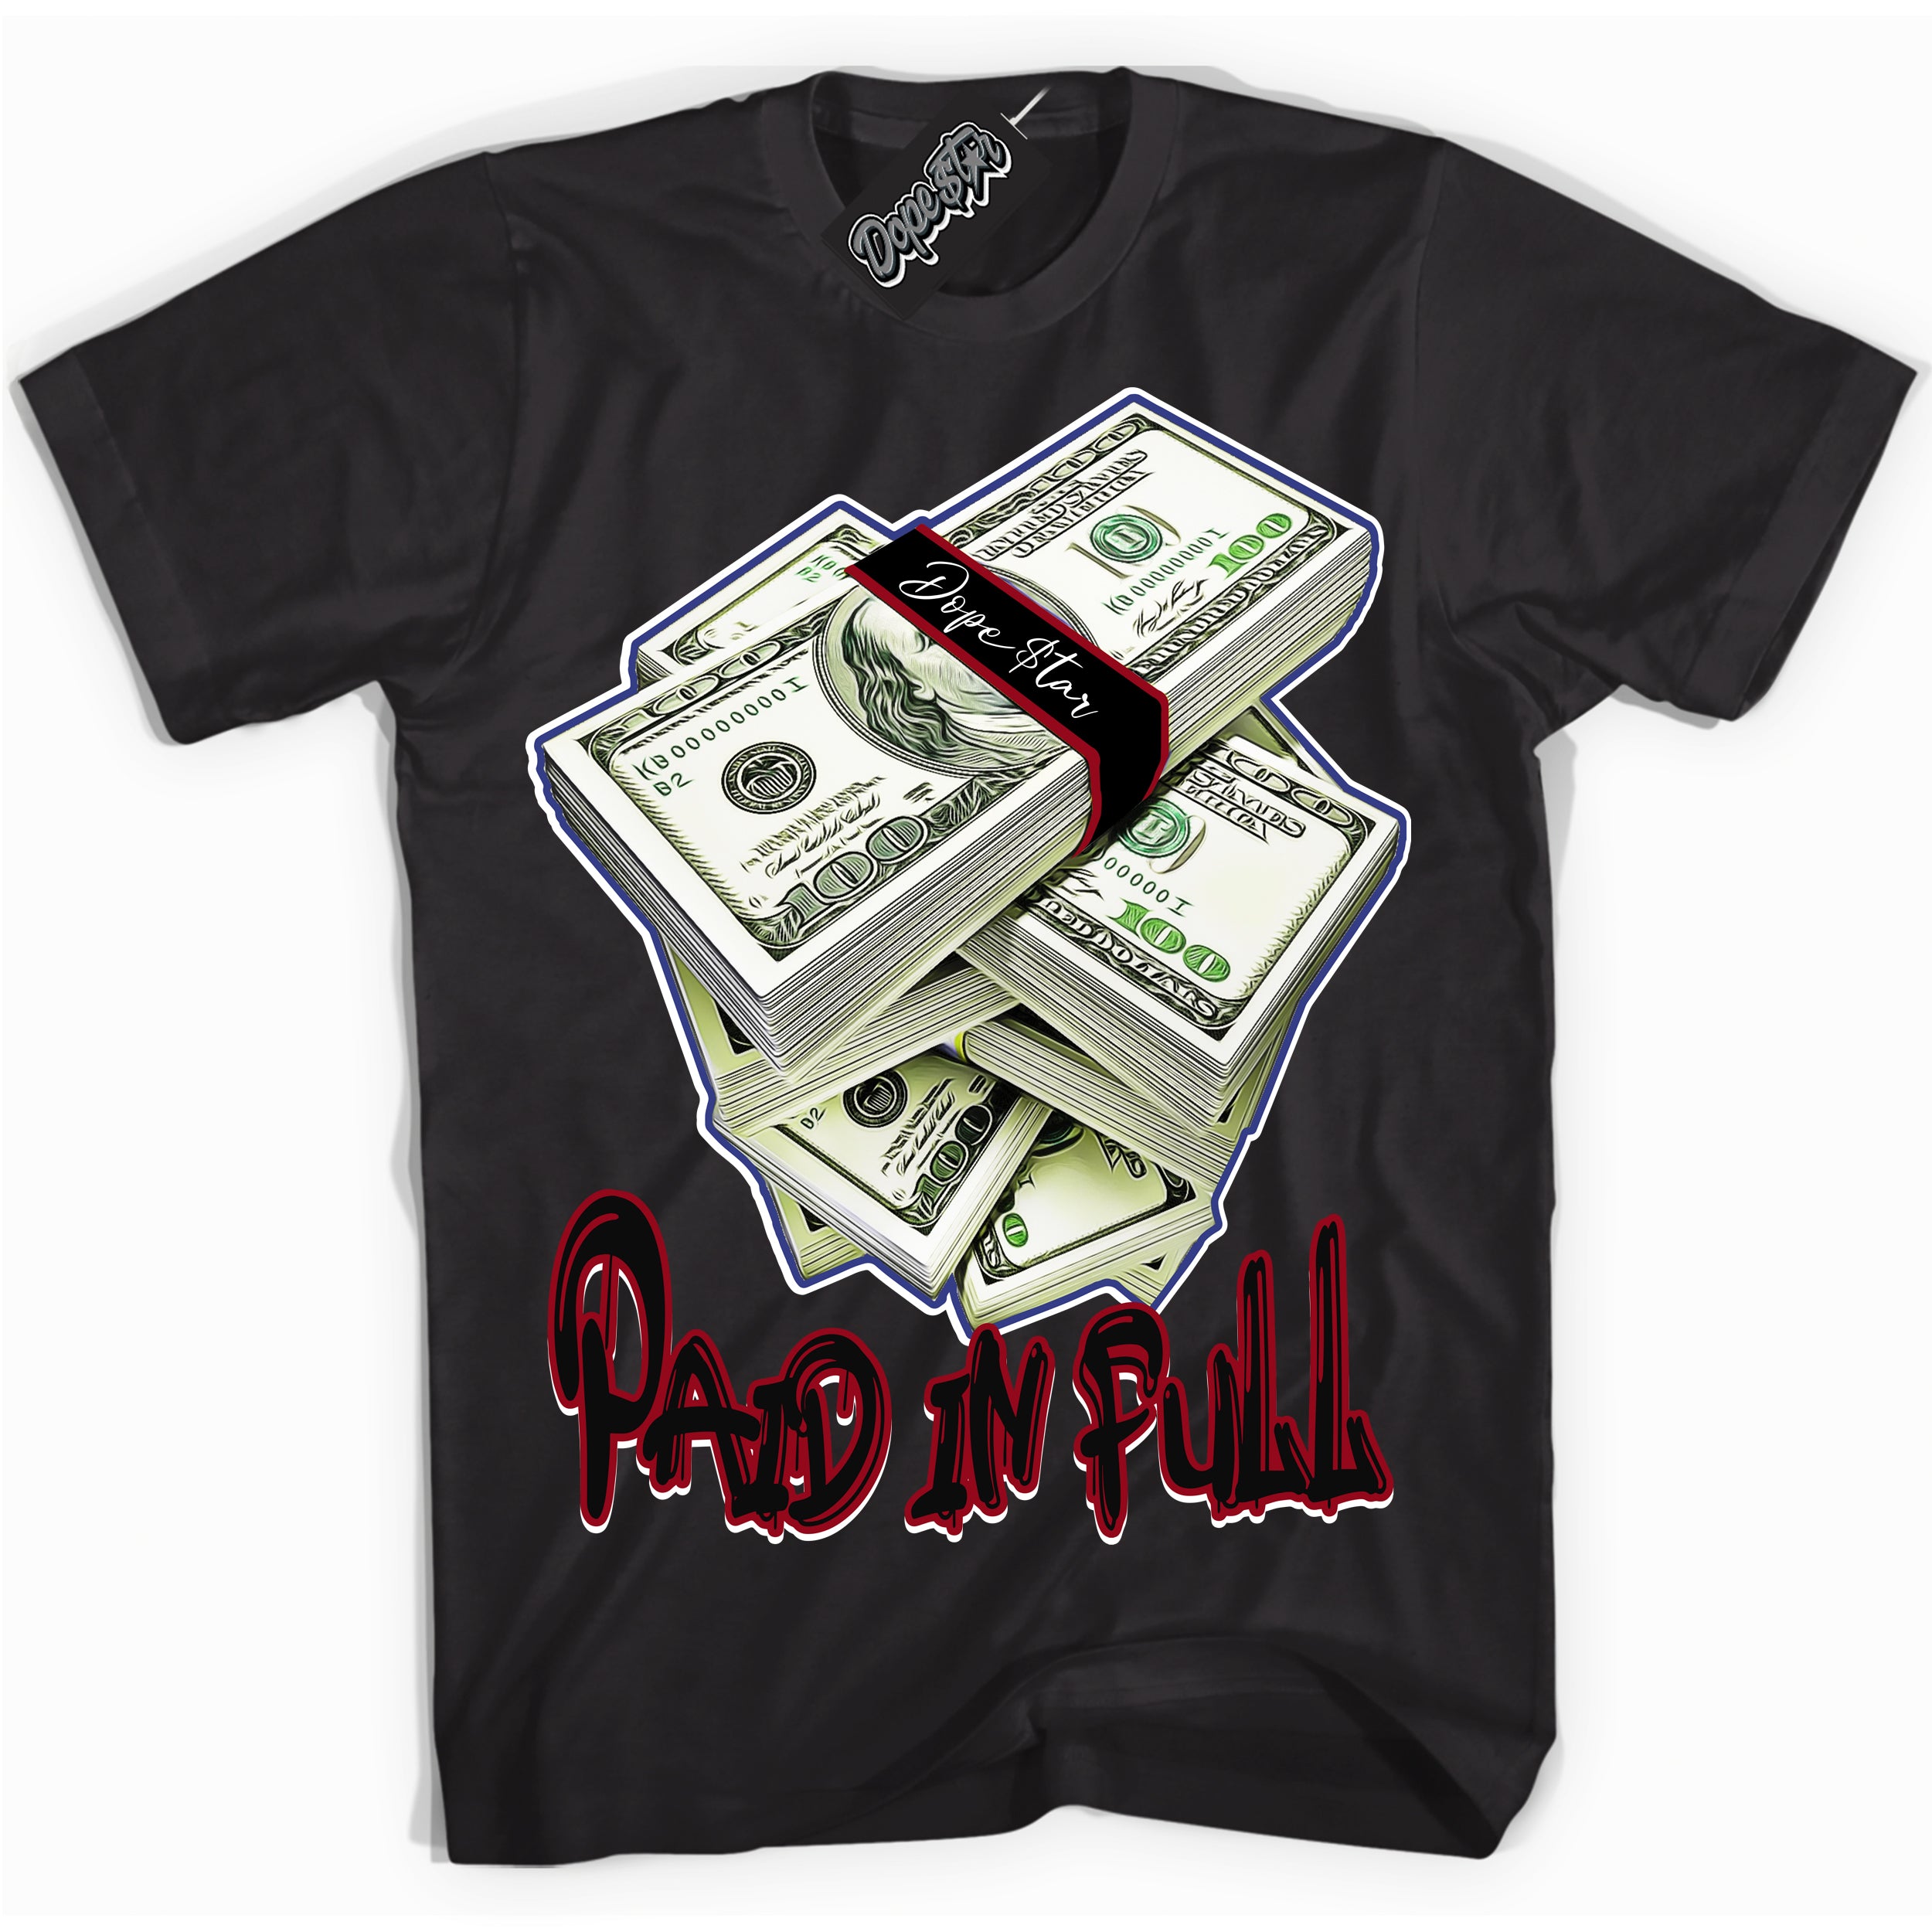 Cool Black Shirt with “ Paid In Full ” design that perfectly matches Playoffs 8s Sneakers.